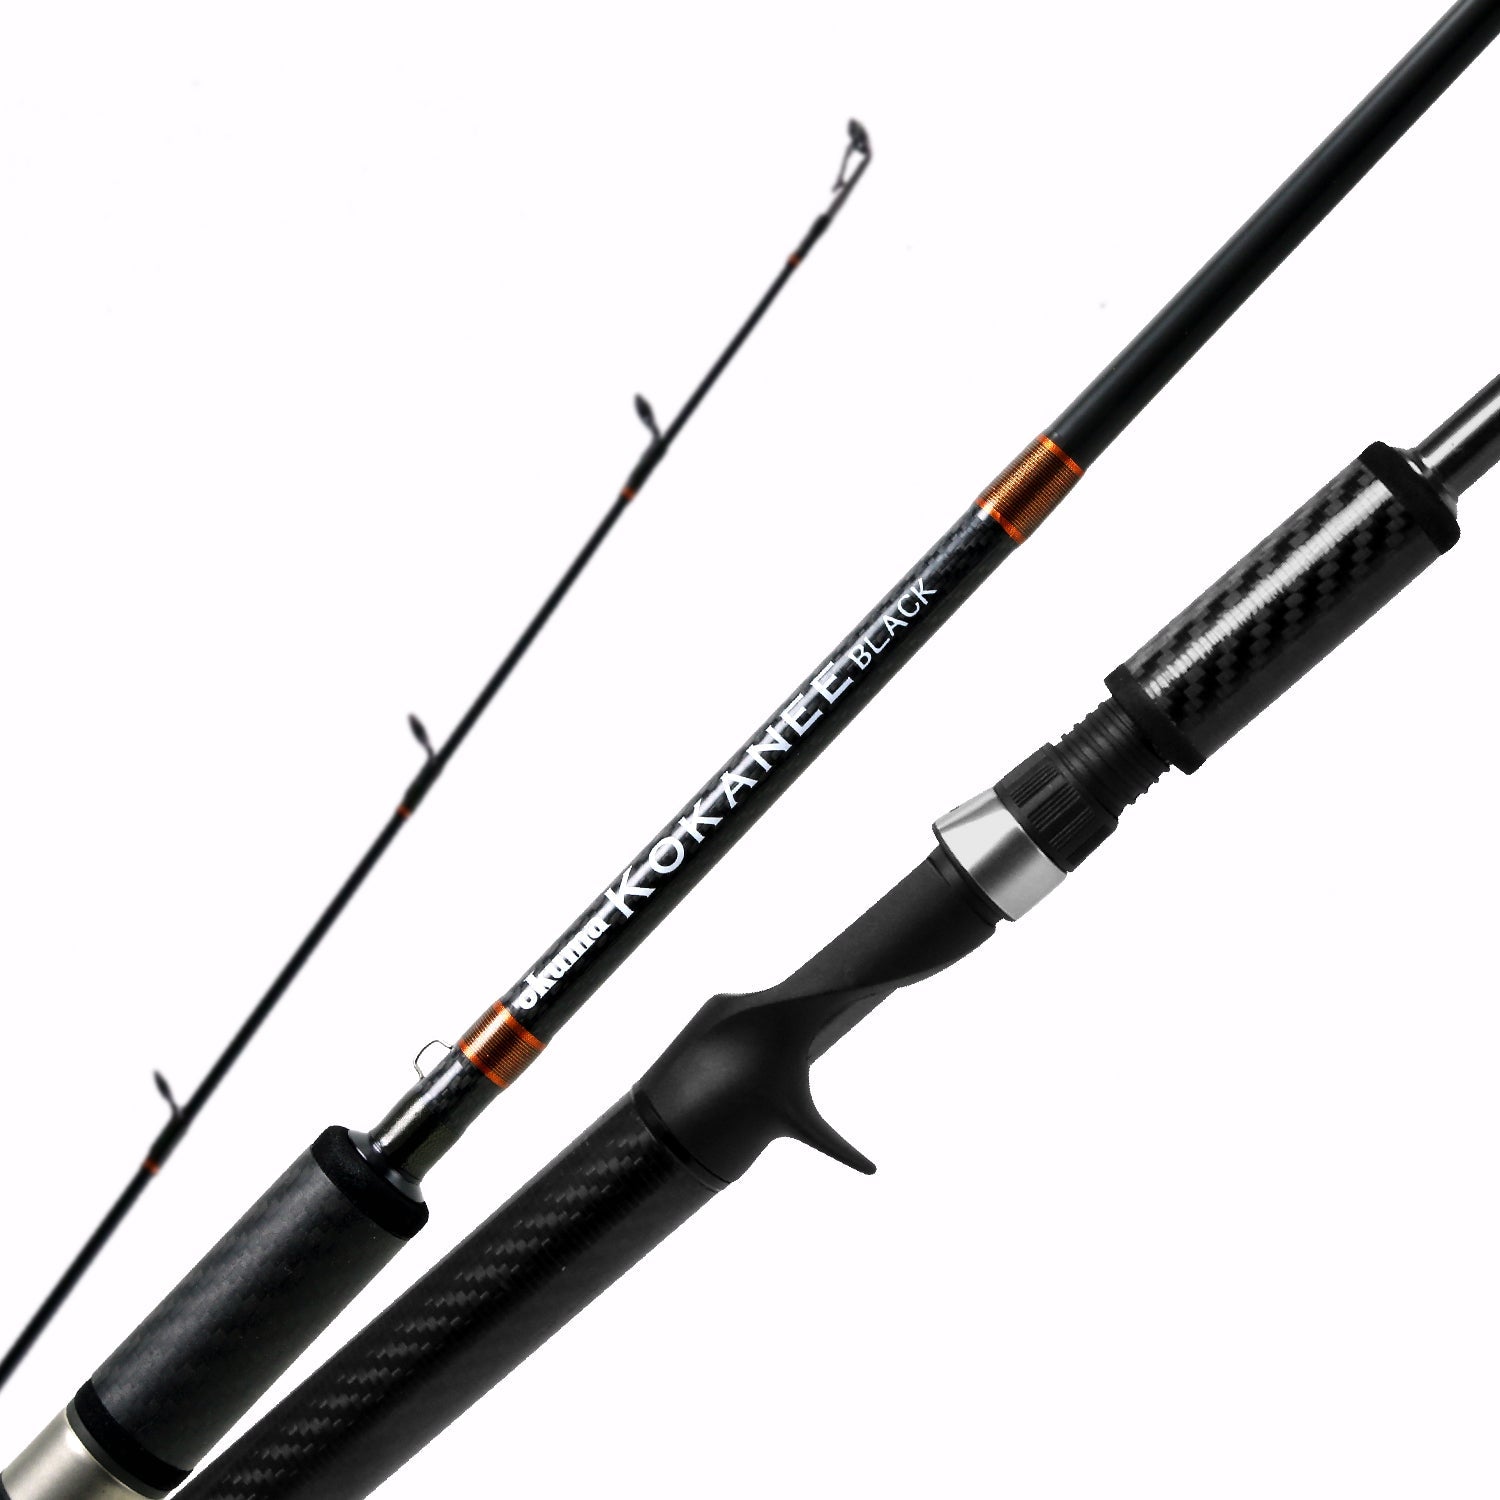 Okuma Guide Select Pro Spinning Rod 9' 0 Light 3 K Woven Grips 2 PC  Gsp-s-902m for sale online